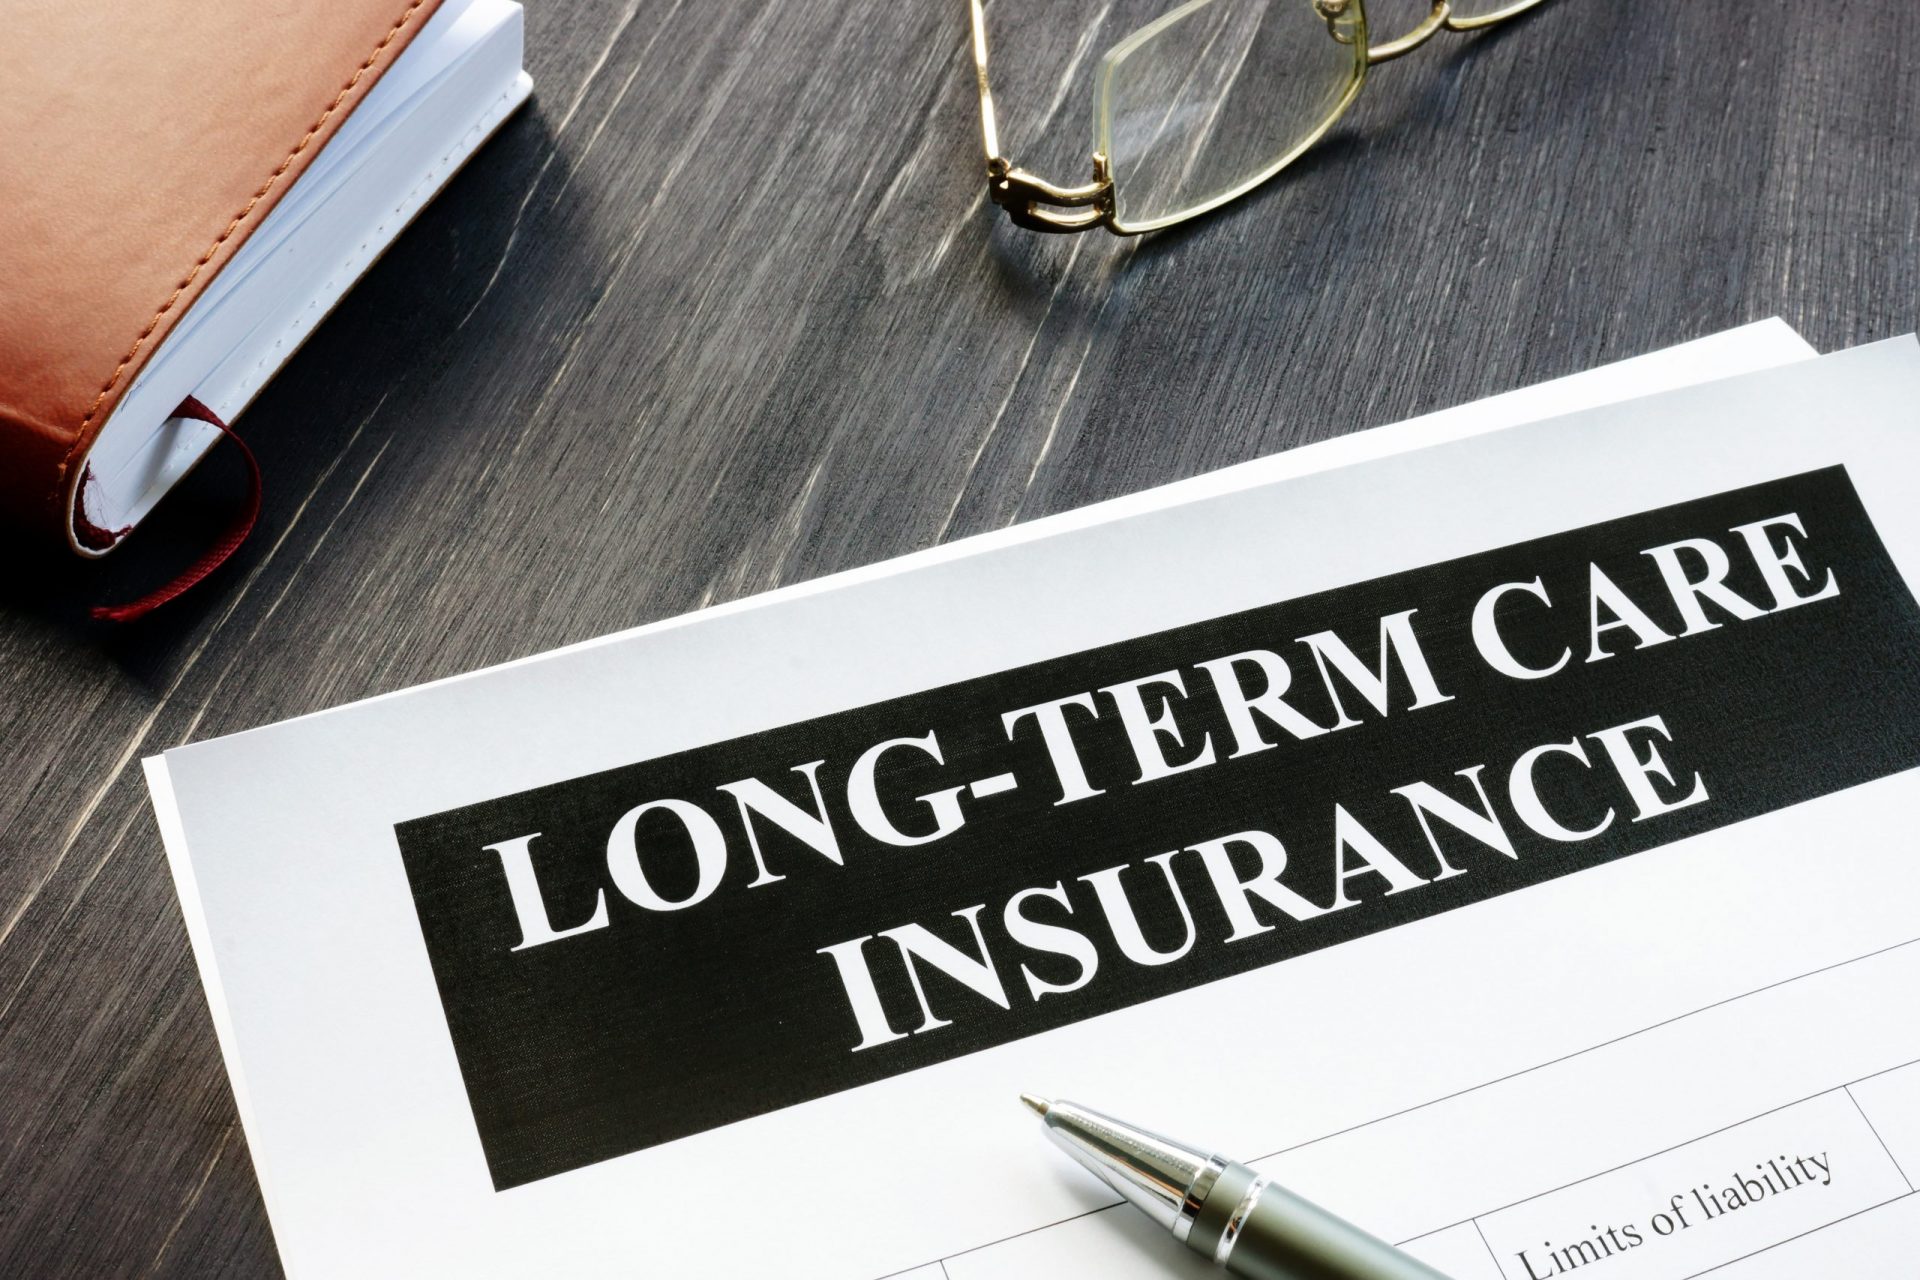 Long-term,Care,Insurance,Agreement,Policy,And,Notebook.